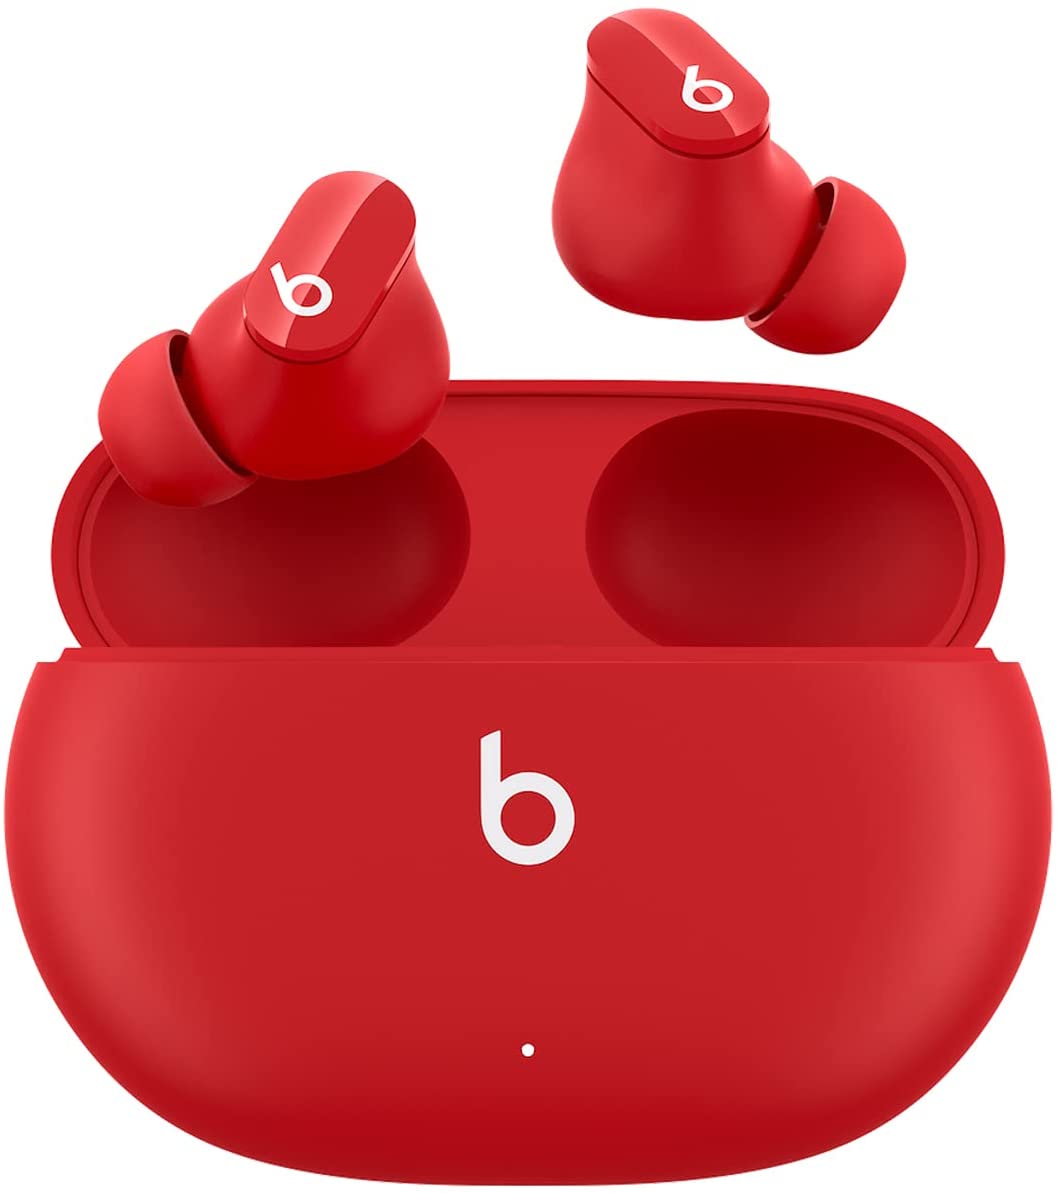 Beats Studio Buds Totally Wireless Noise Cancelling Earphones - Red (Refurbished)